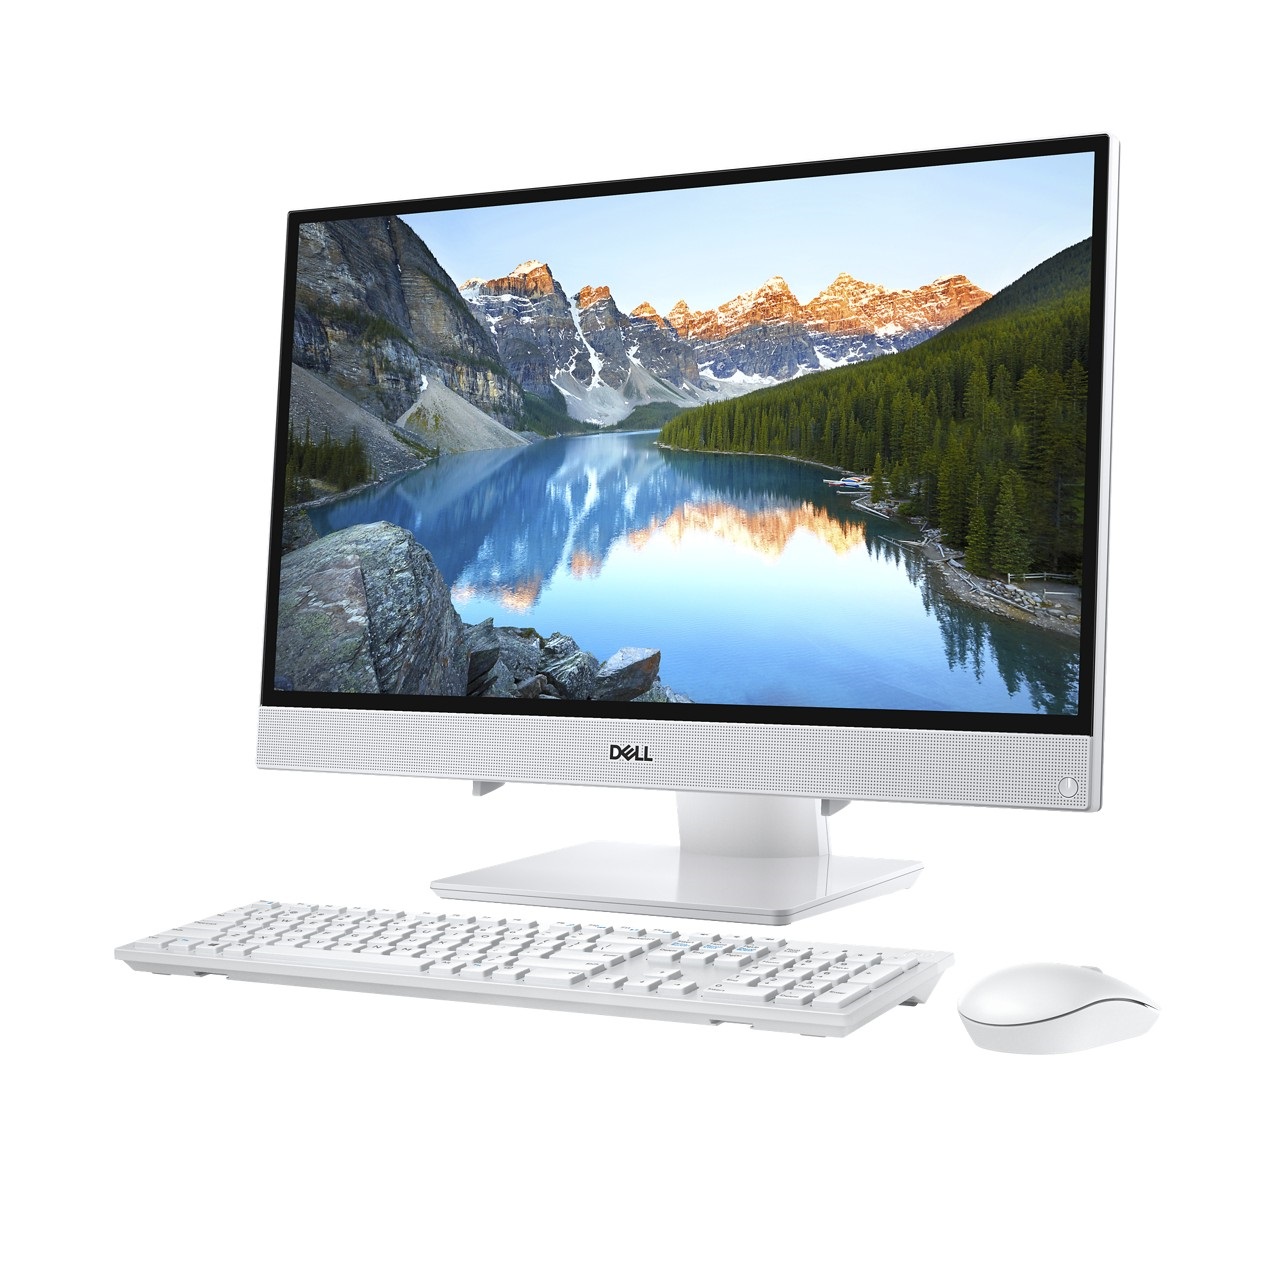 Dell Inspiron 3280 All-In-One22インチデスクトップ-